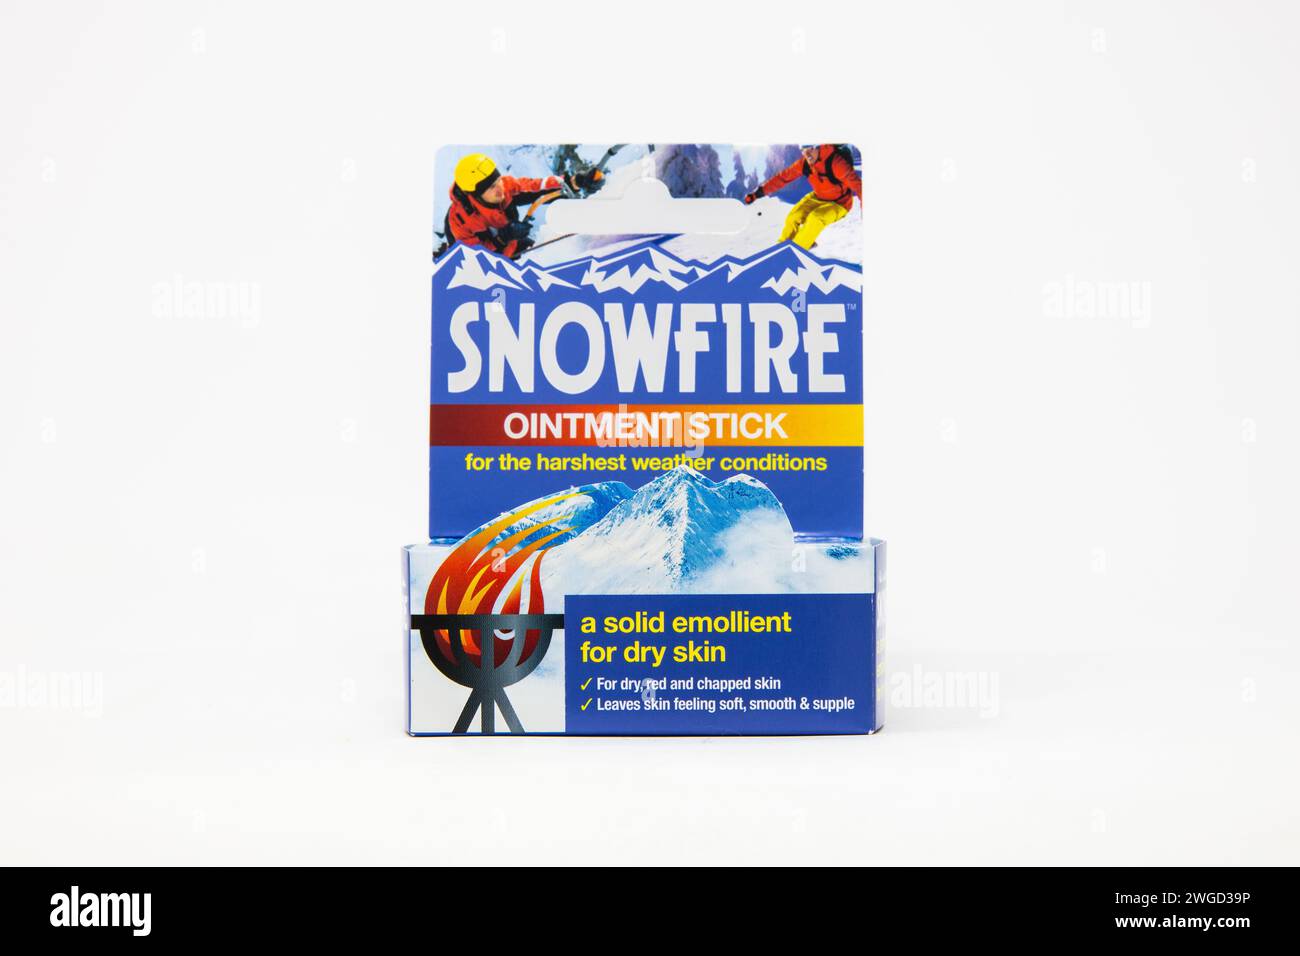 Snowfire Ointment Stick 18g. Stock Photo